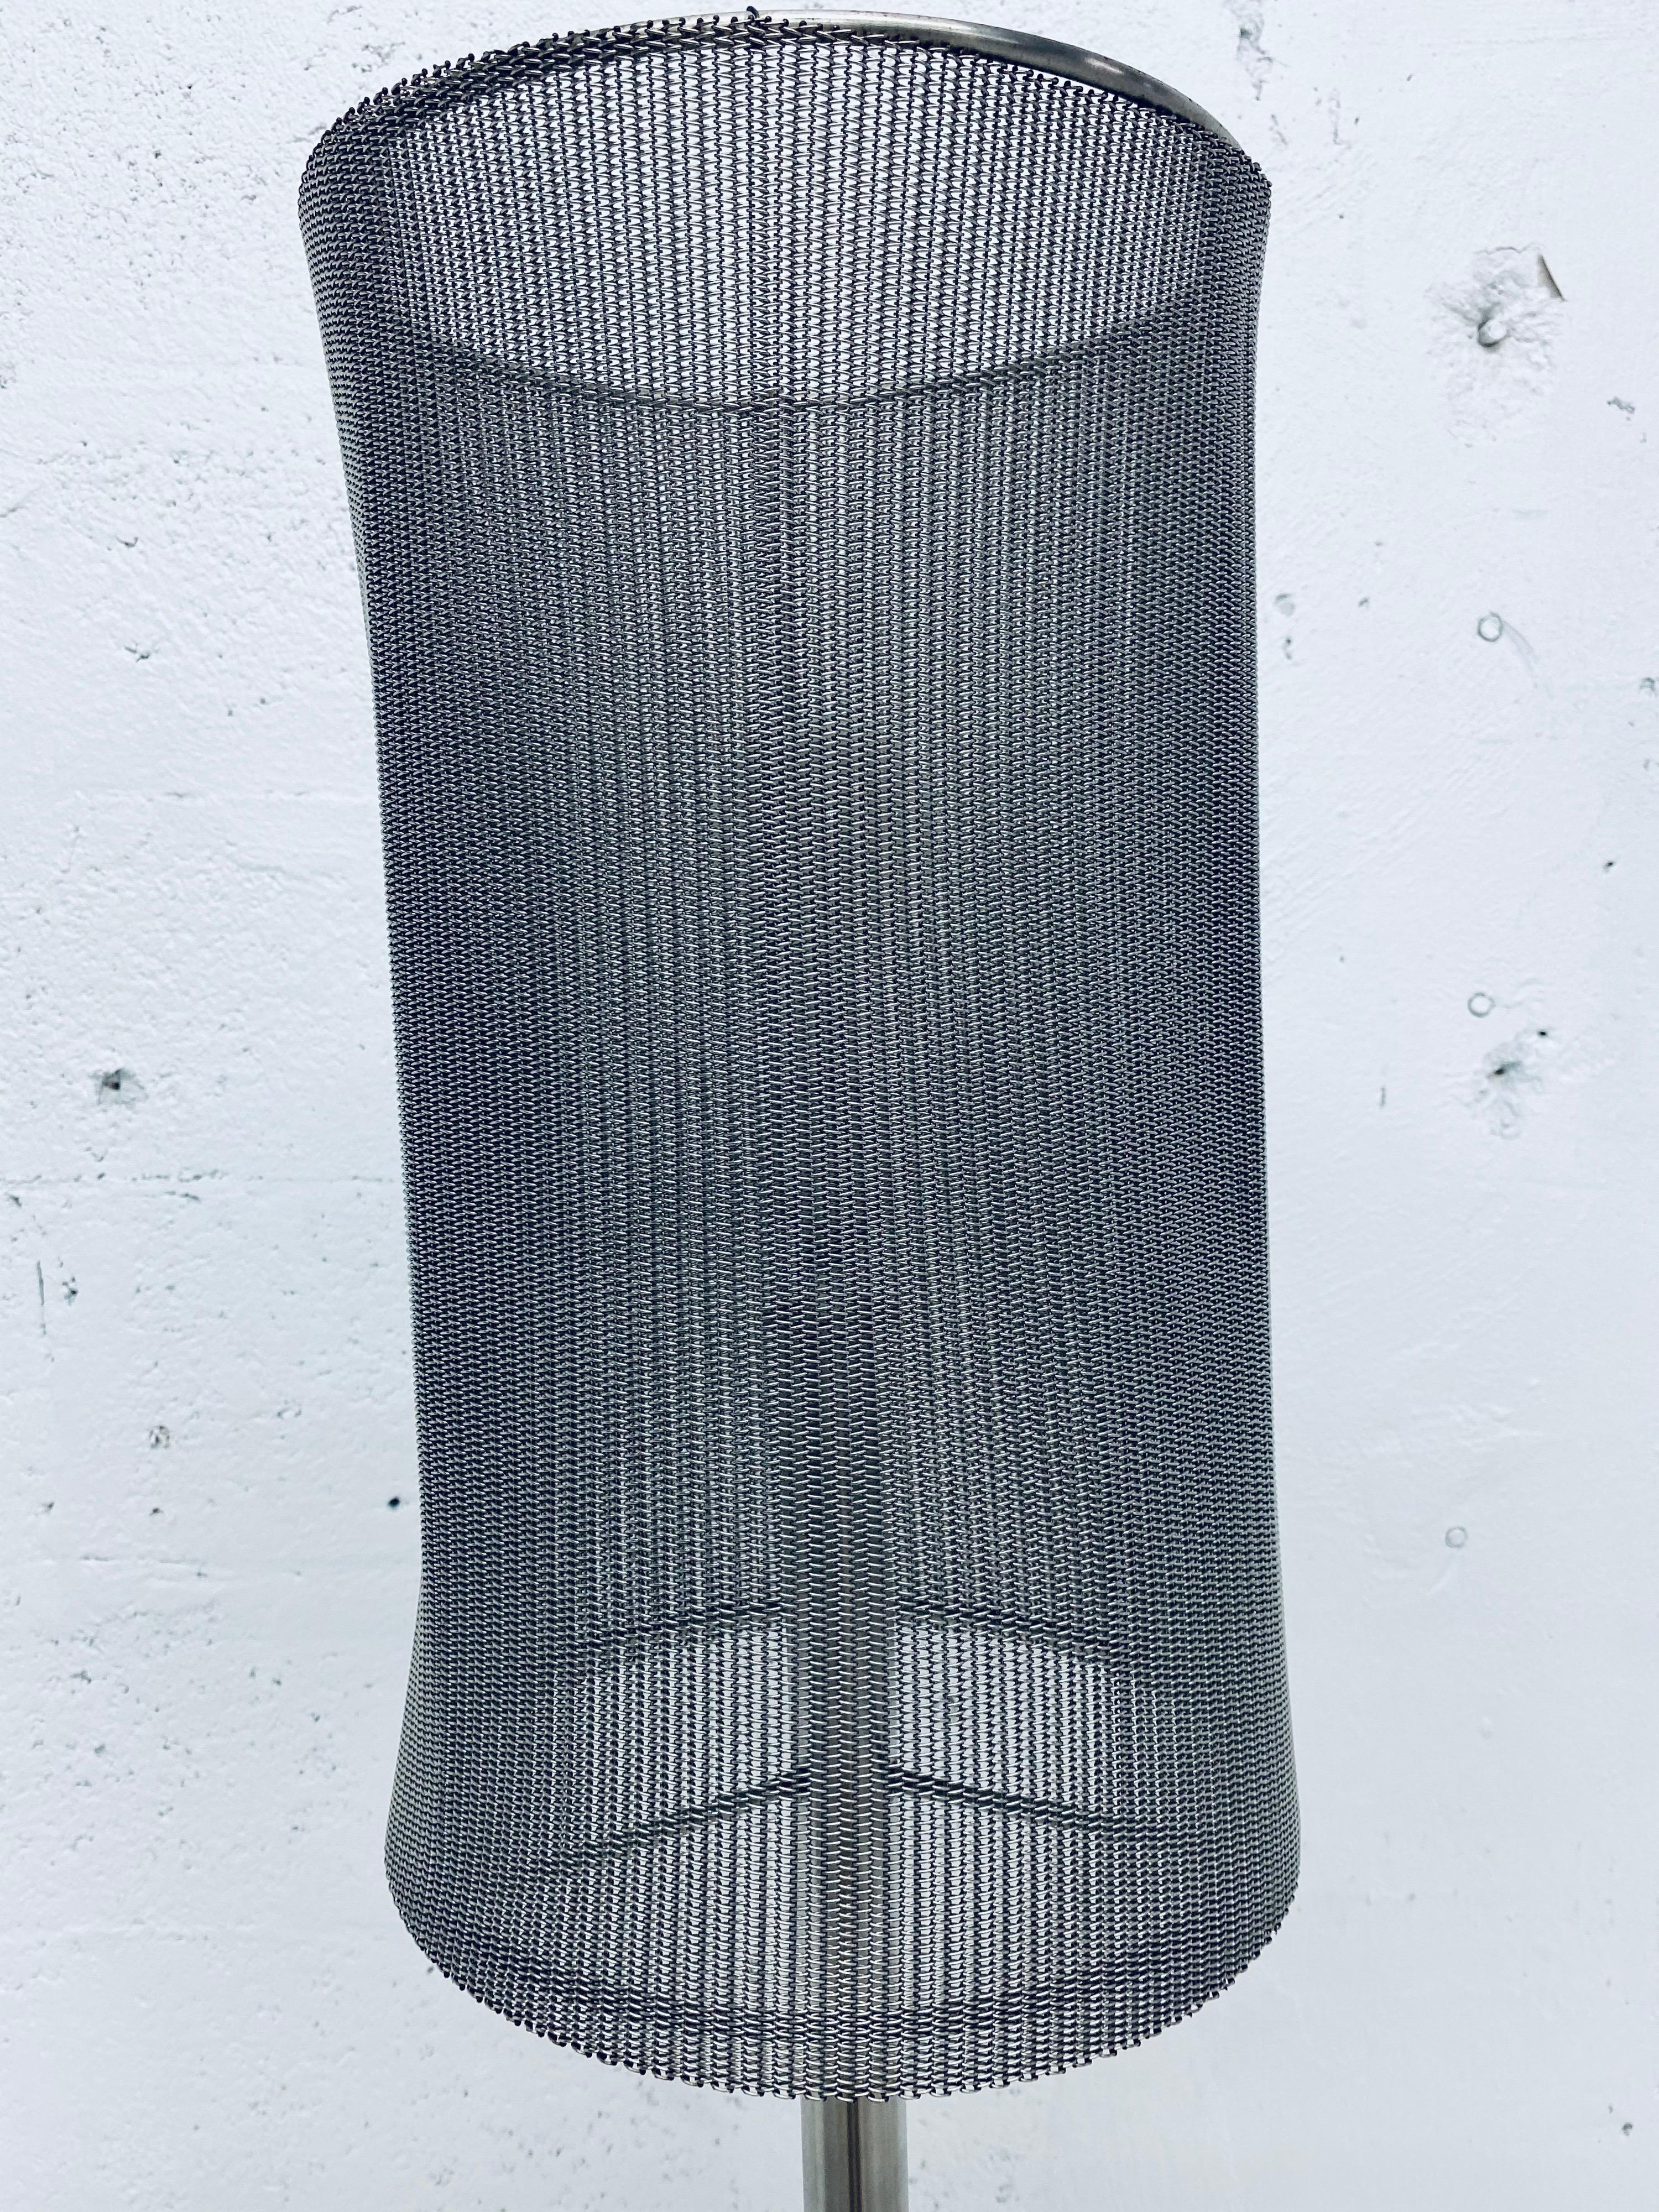 Custom Welded Steel and Mesh Shade Floor Lamp by Automatic, Inc. For Sale 4